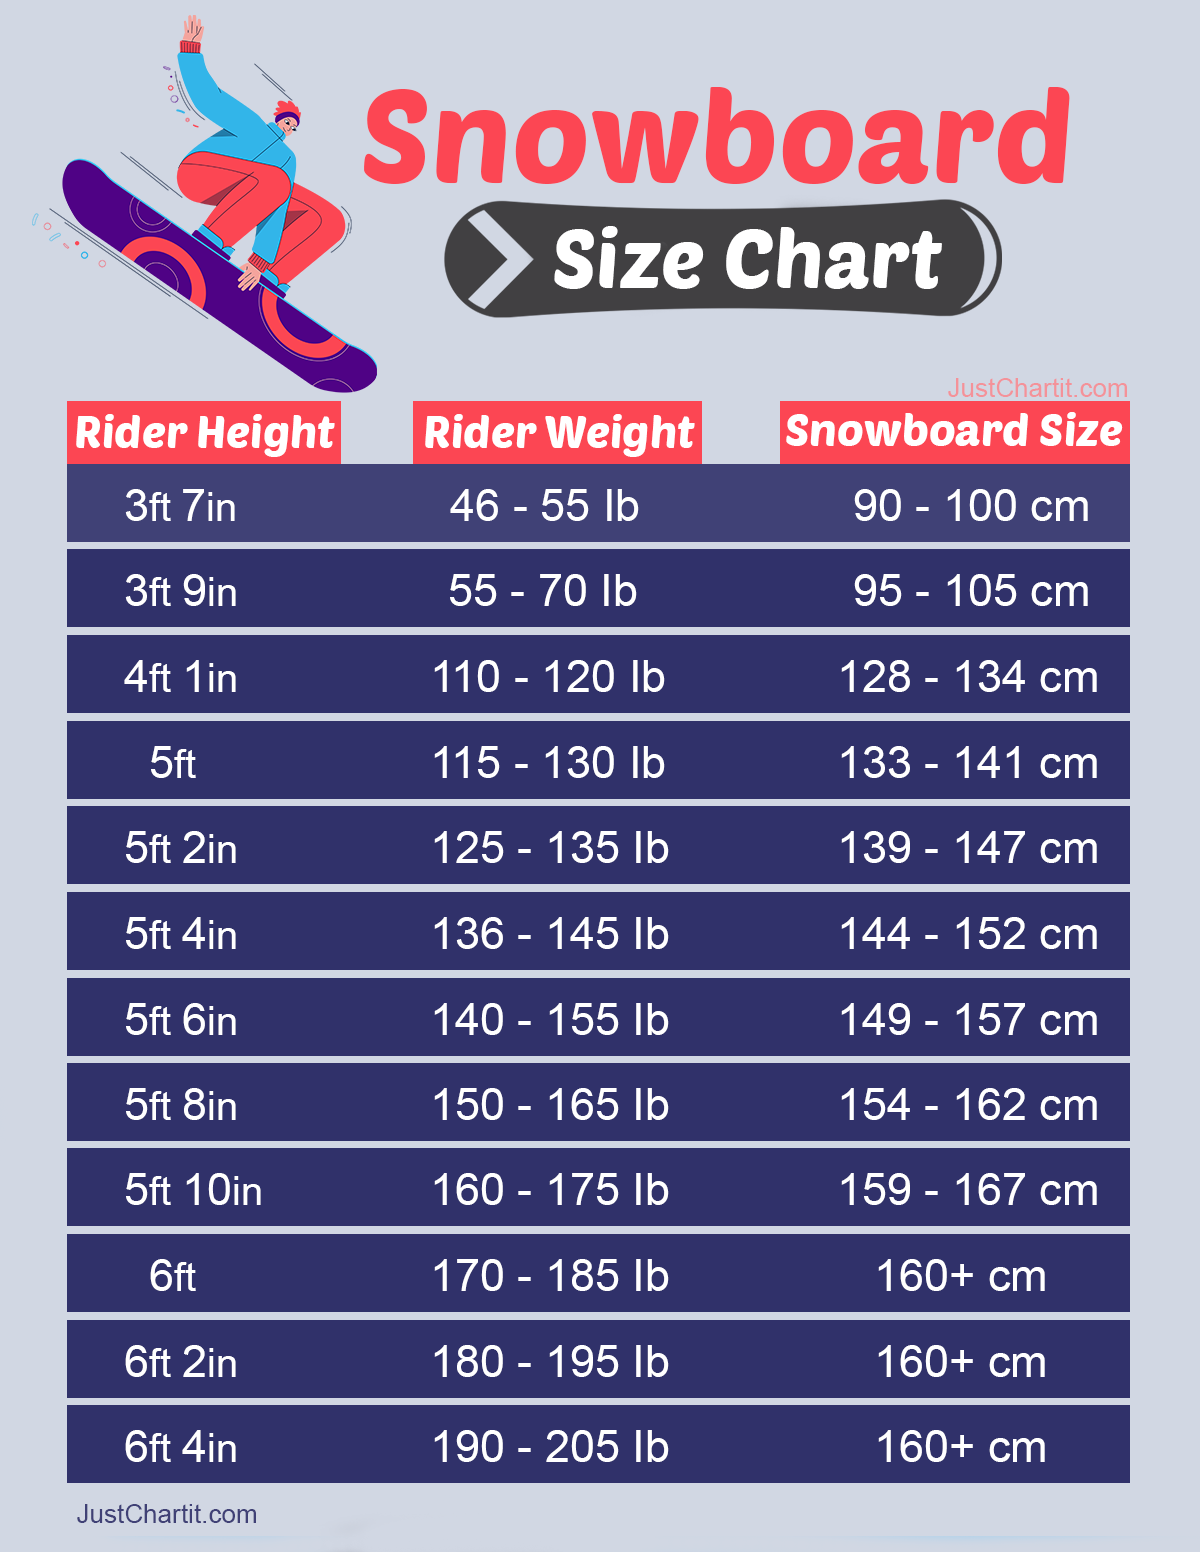 snowboard size chart with width height in inches and cm